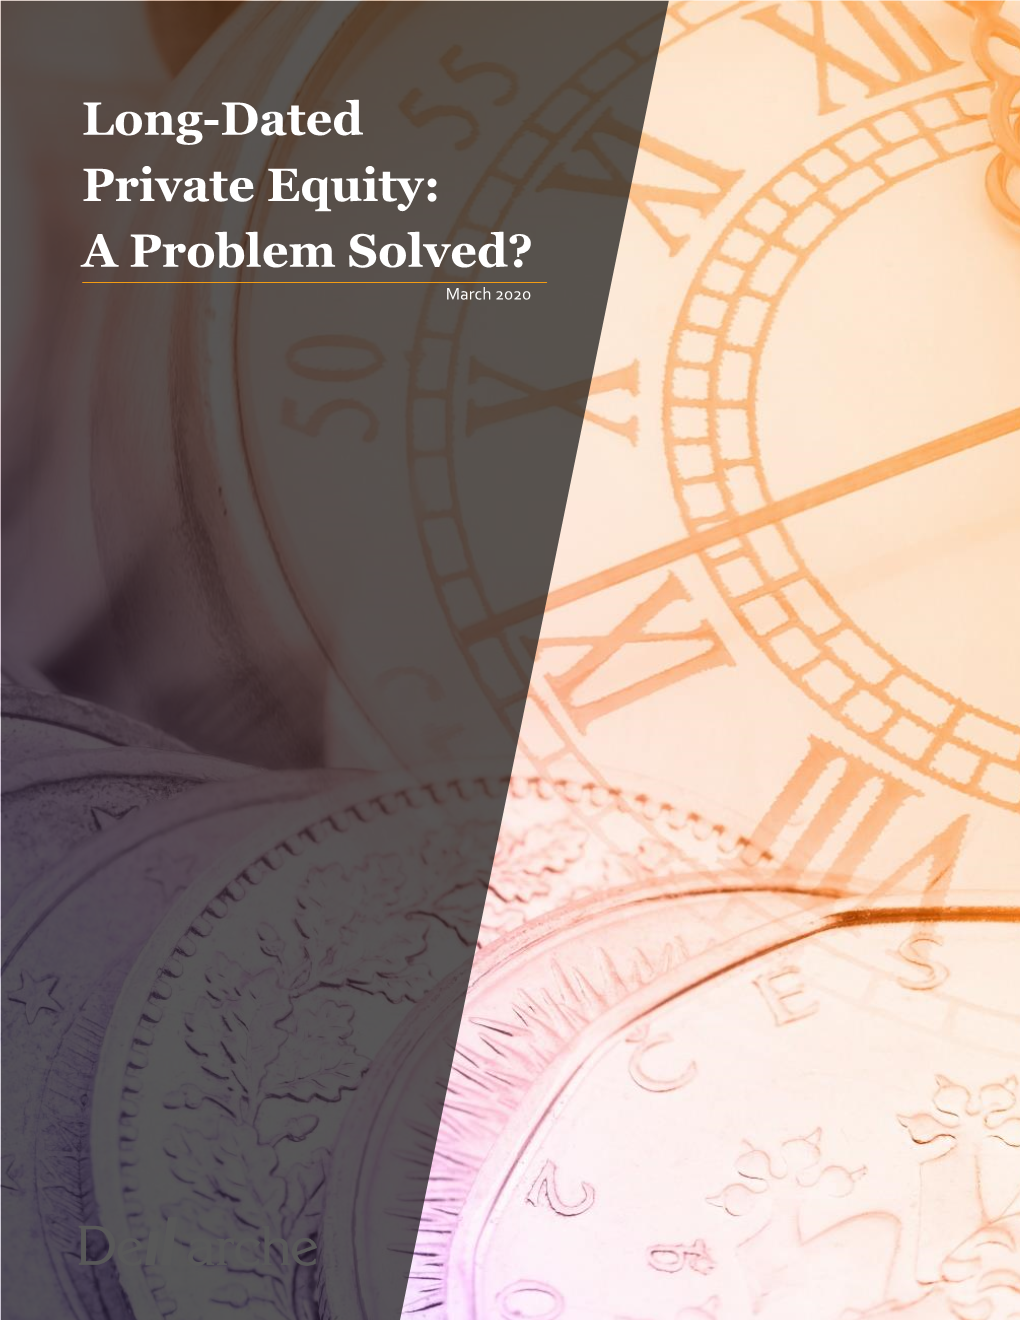 Long-Dated Private Equity: a Problem Solved? March 2020